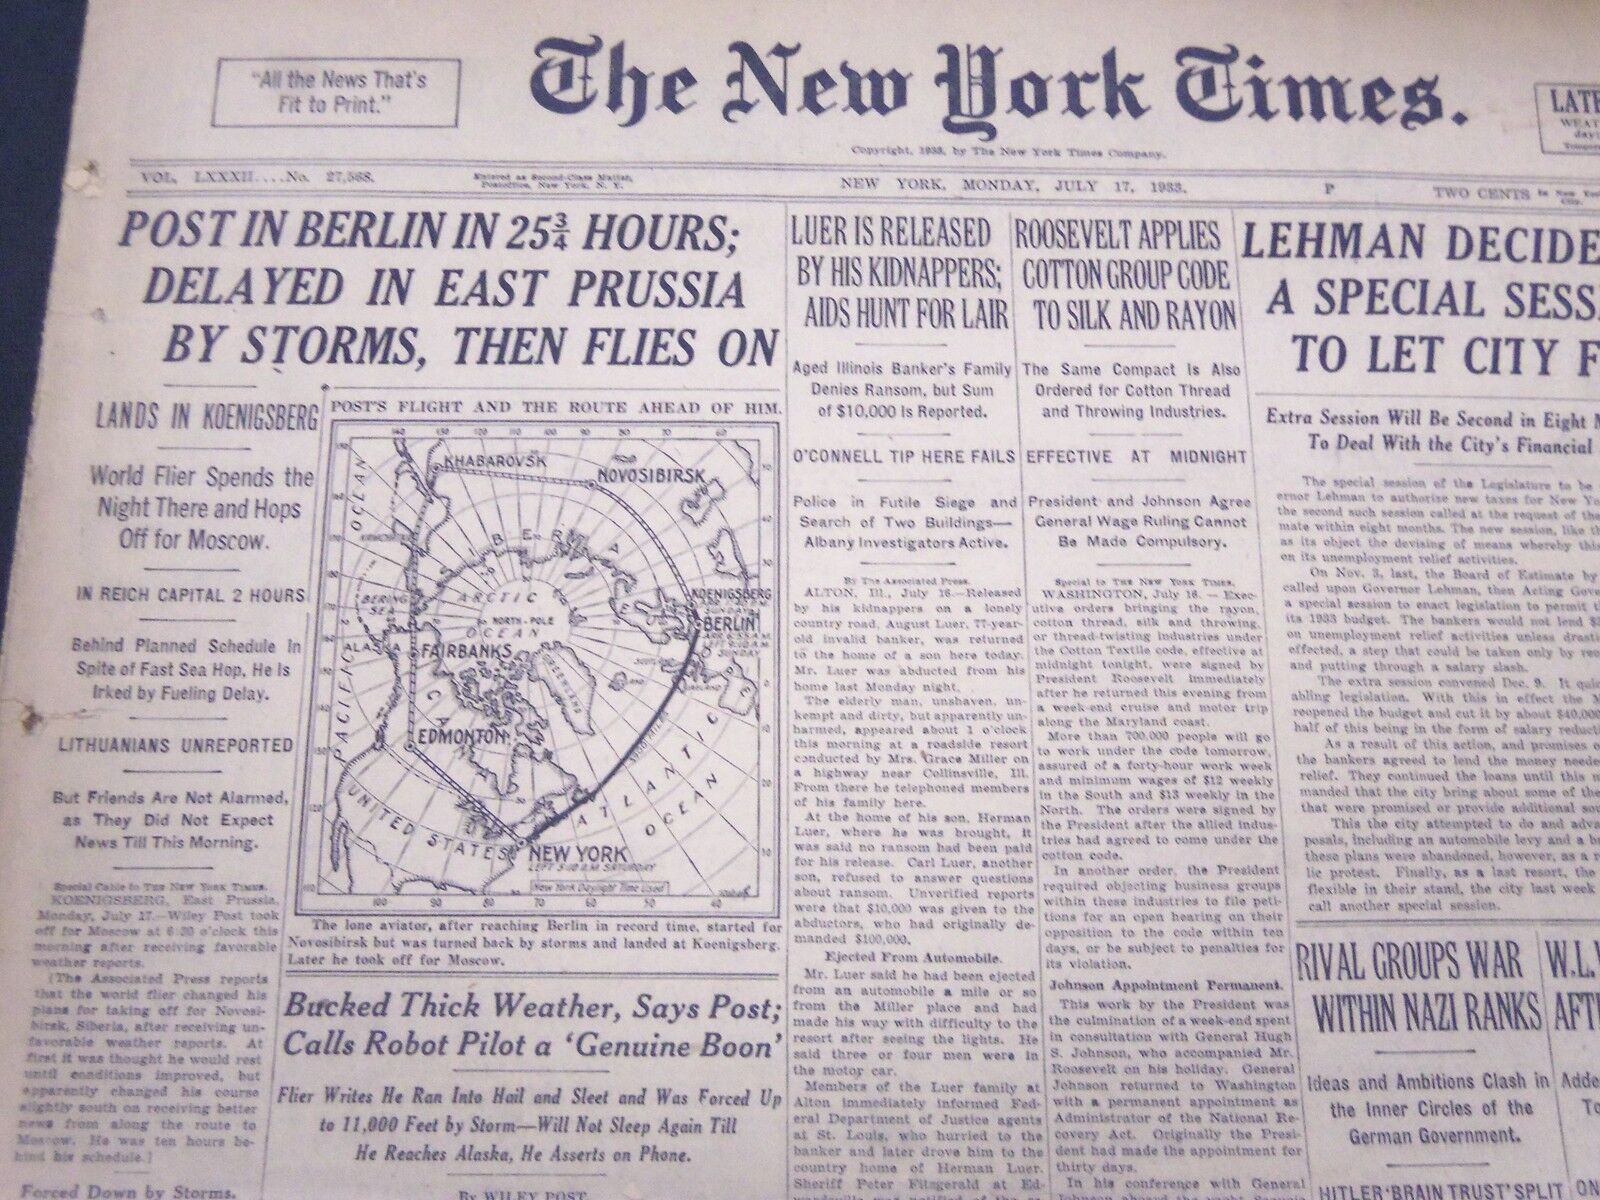 1933 JULY 17 NEW YORK TIMES - ROST IN BERLIN IN 25 3/4 HOURS - NT 5189